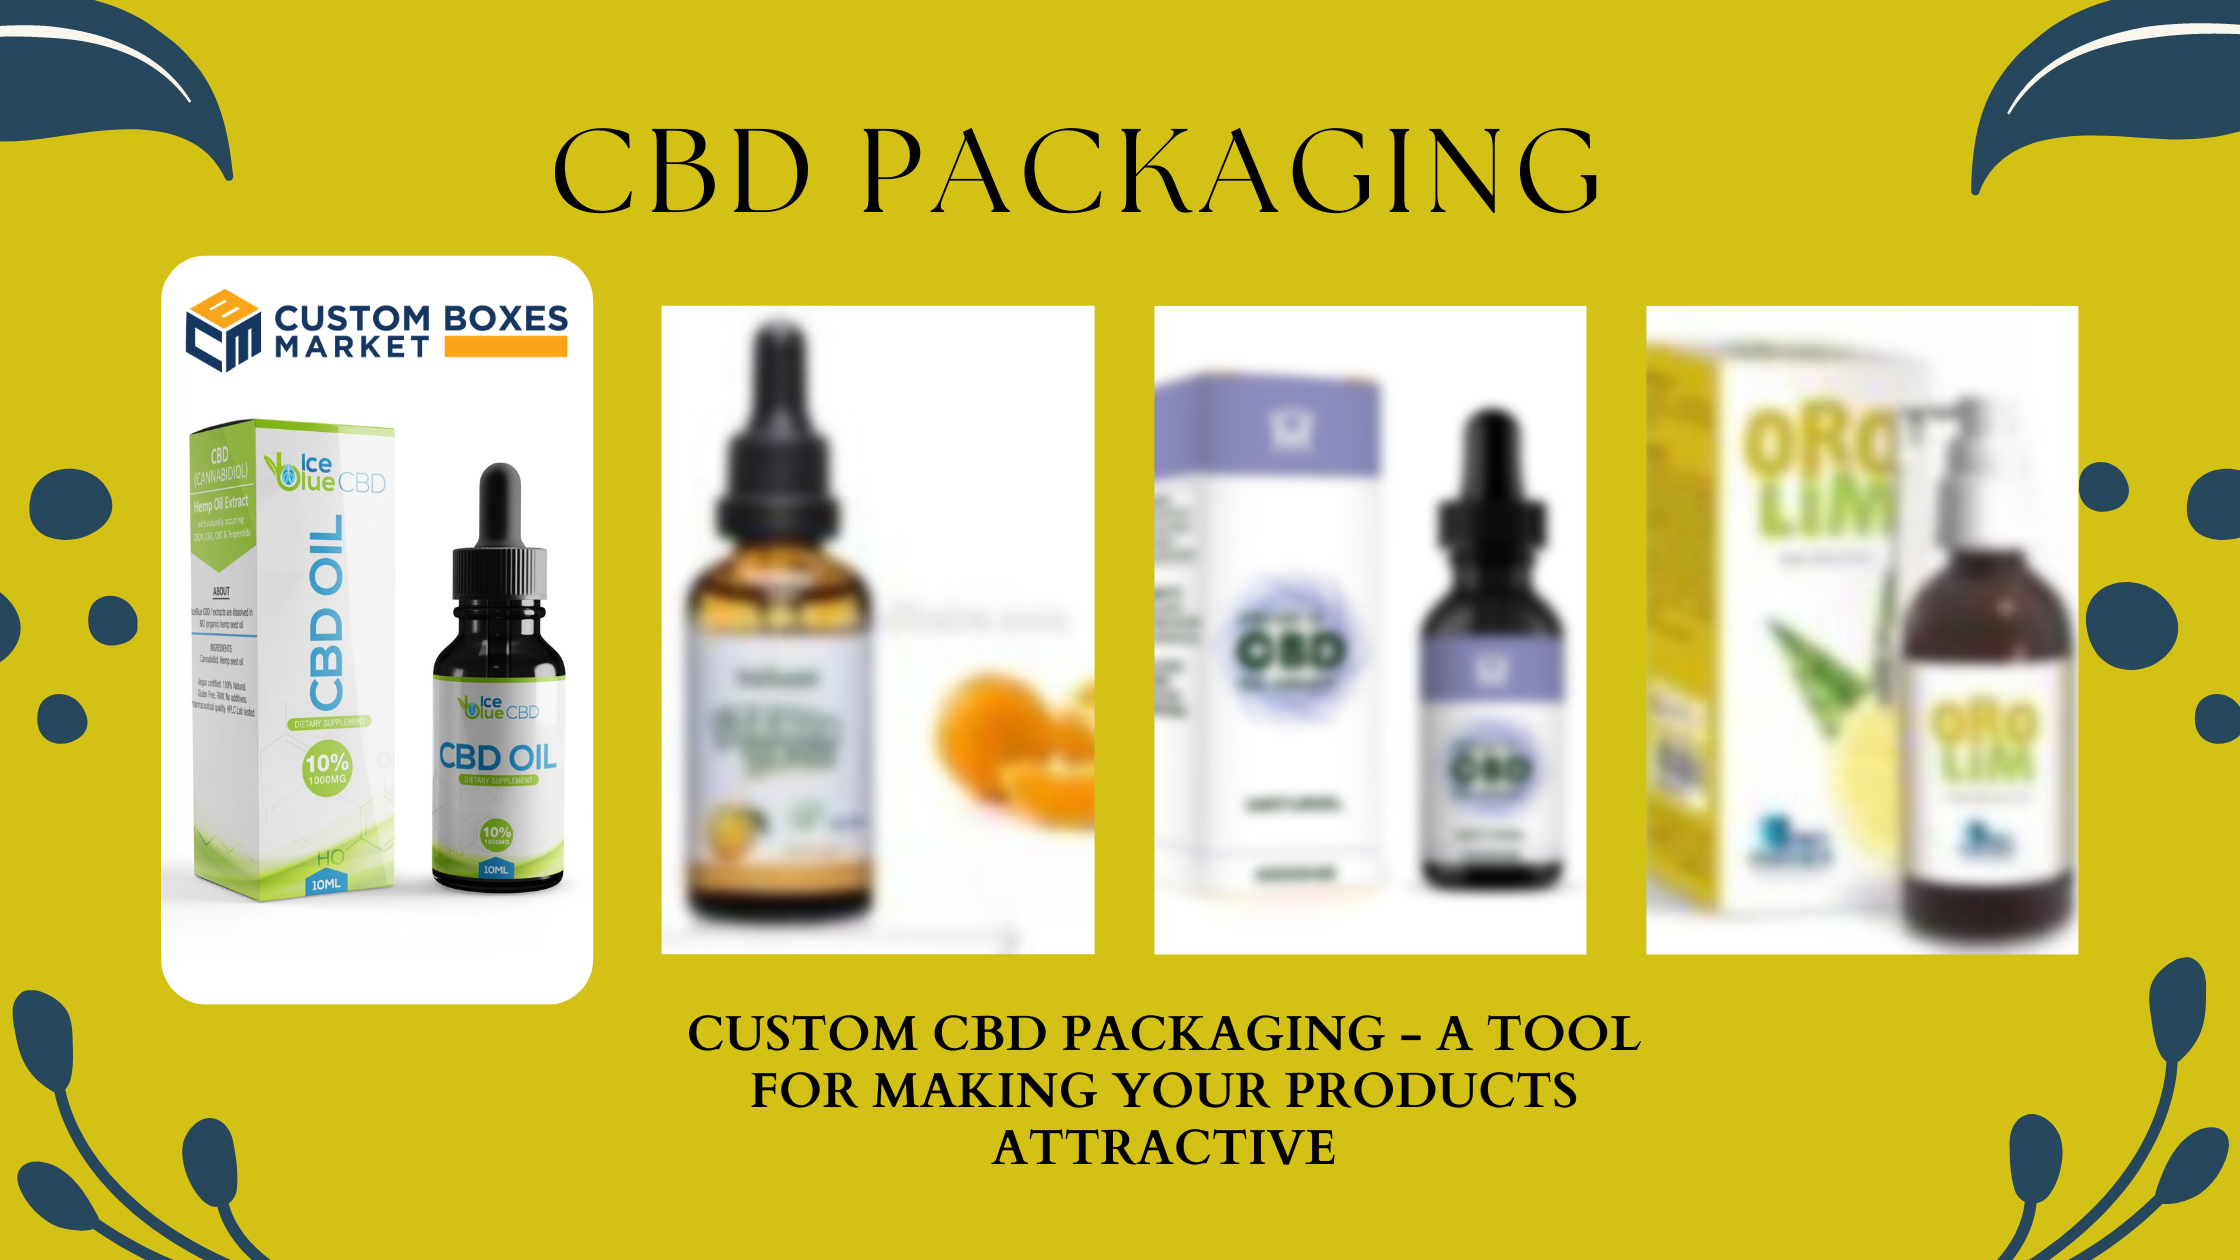 Custom CBD Packaging - A Tool For Making Your Products Attractive